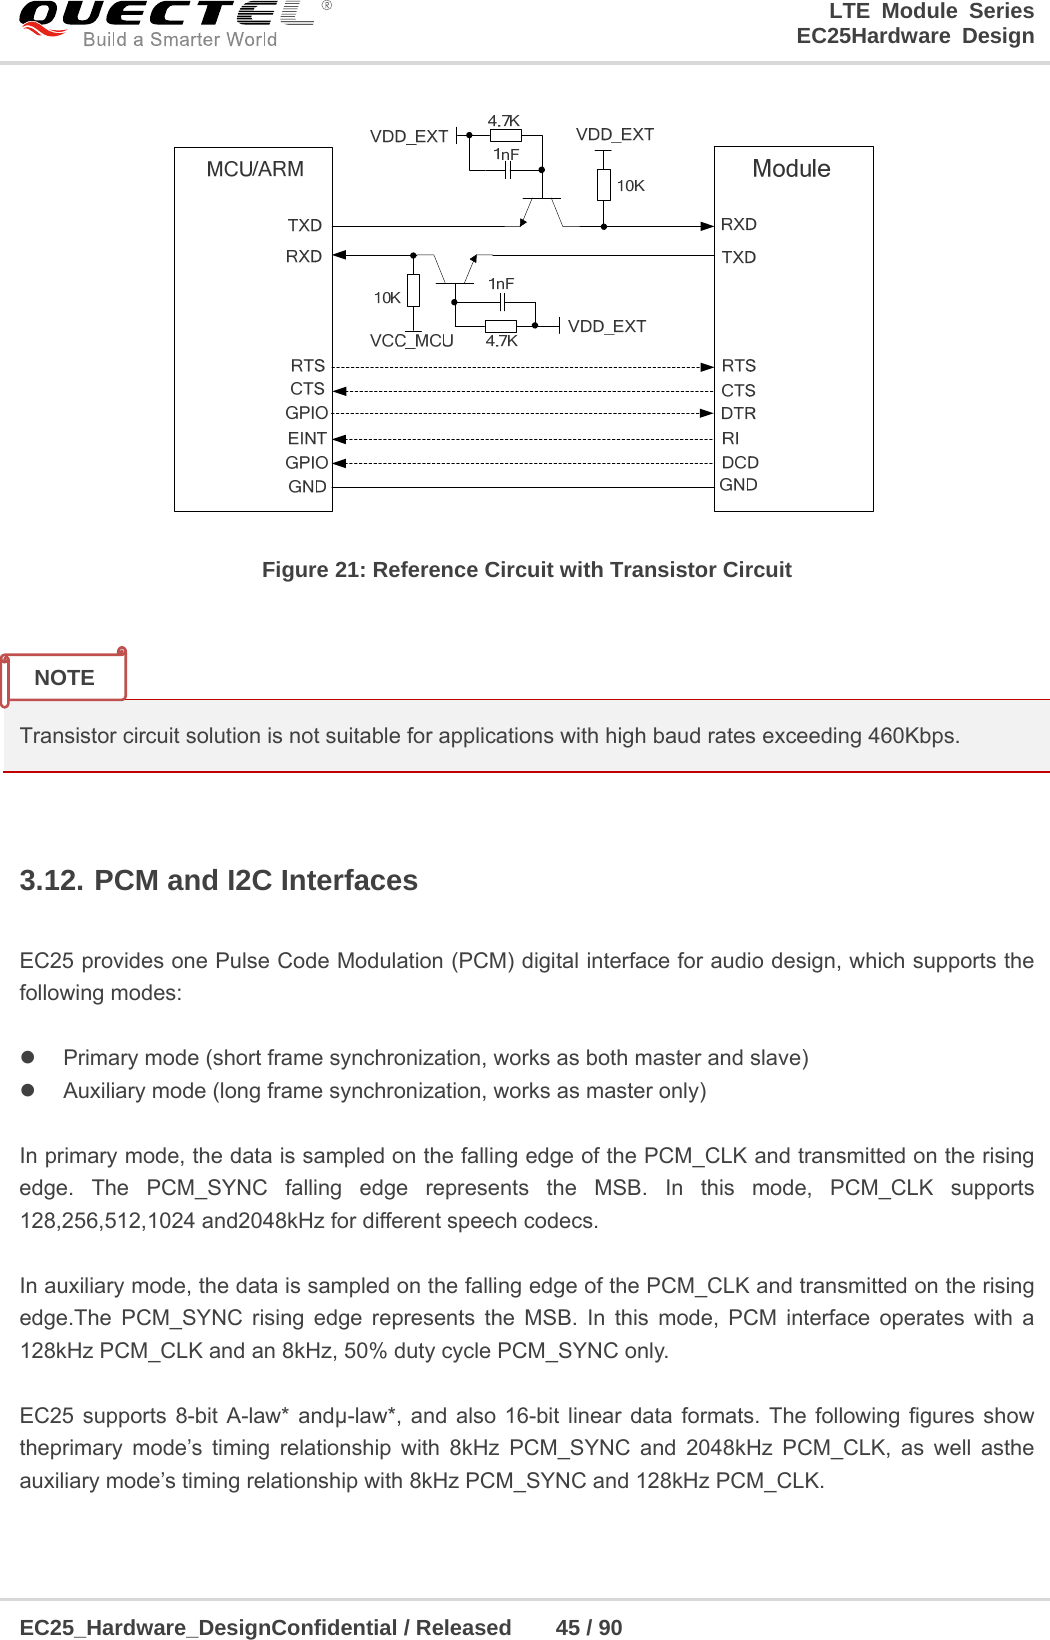 LTE Module Series                                                  EC25Hardware Design  EC25_Hardware_DesignConfidential / Released    45 / 90     Figure 21: Reference Circuit with Transistor Circuit    Transistor circuit solution is not suitable for applications with high baud rates exceeding 460Kbps.  3.12. PCM and I2C Interfaces  EC25 provides one Pulse Code Modulation (PCM) digital interface for audio design, which supports the following modes:    Primary mode (short frame synchronization, works as both master and slave)   Auxiliary mode (long frame synchronization, works as master only)  In primary mode, the data is sampled on the falling edge of the PCM_CLK and transmitted on the rising edge. The PCM_SYNC falling edge represents the MSB. In this mode, PCM_CLK supports 128,256,512,1024 and2048kHz for different speech codecs.  In auxiliary mode, the data is sampled on the falling edge of the PCM_CLK and transmitted on the rising edge.The PCM_SYNC rising edge represents the MSB. In this mode, PCM interface operates with a 128kHz PCM_CLK and an 8kHz, 50% duty cycle PCM_SYNC only.  EC25 supports 8-bit A-law* andμ-law*, and also 16-bit linear data formats. The following figures show theprimary mode’s timing relationship with 8kHz PCM_SYNC and 2048kHz PCM_CLK, as well asthe auxiliary mode’s timing relationship with 8kHz PCM_SYNC and 128kHz PCM_CLK. NOTE 